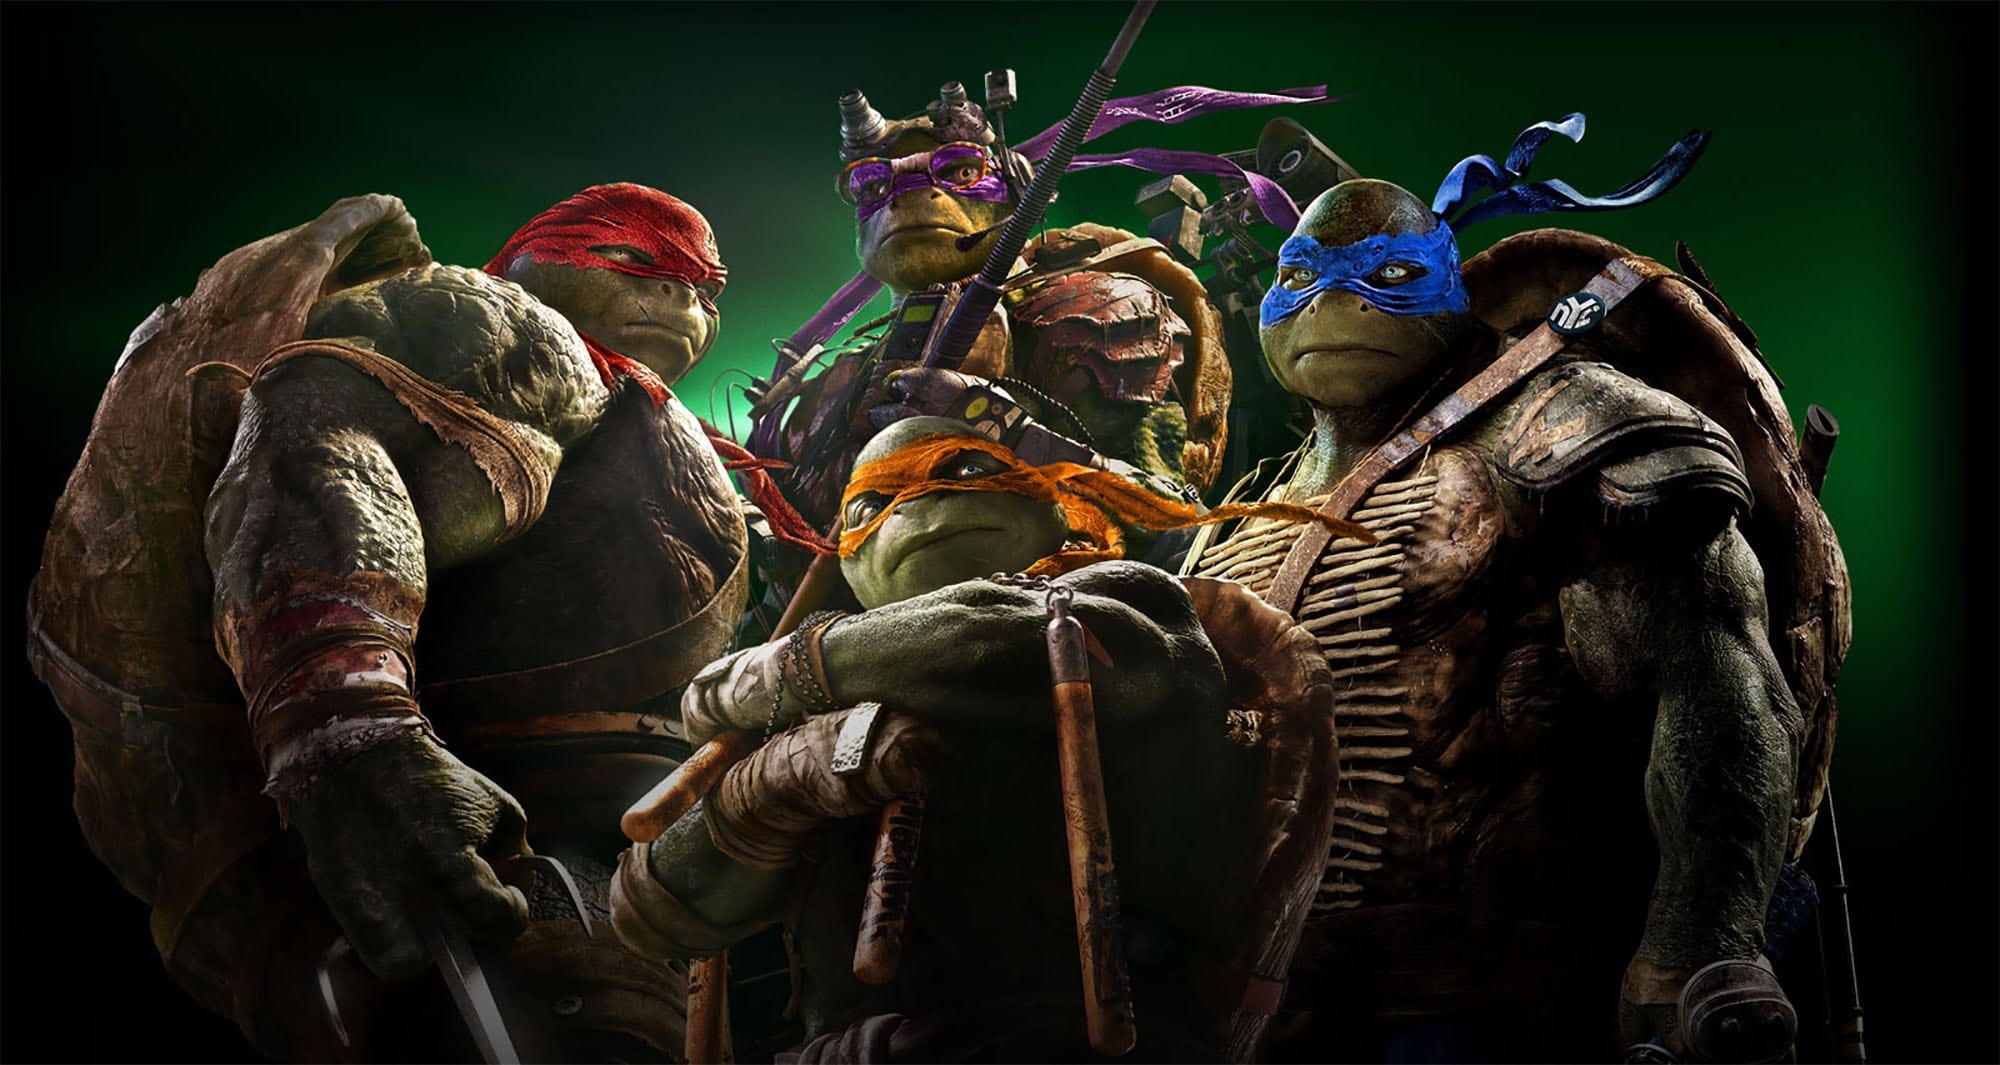 Along with the "radical" reboot of 'Teenage Mutant Ninja Turtles', what other remakes are currently in the pipeline?